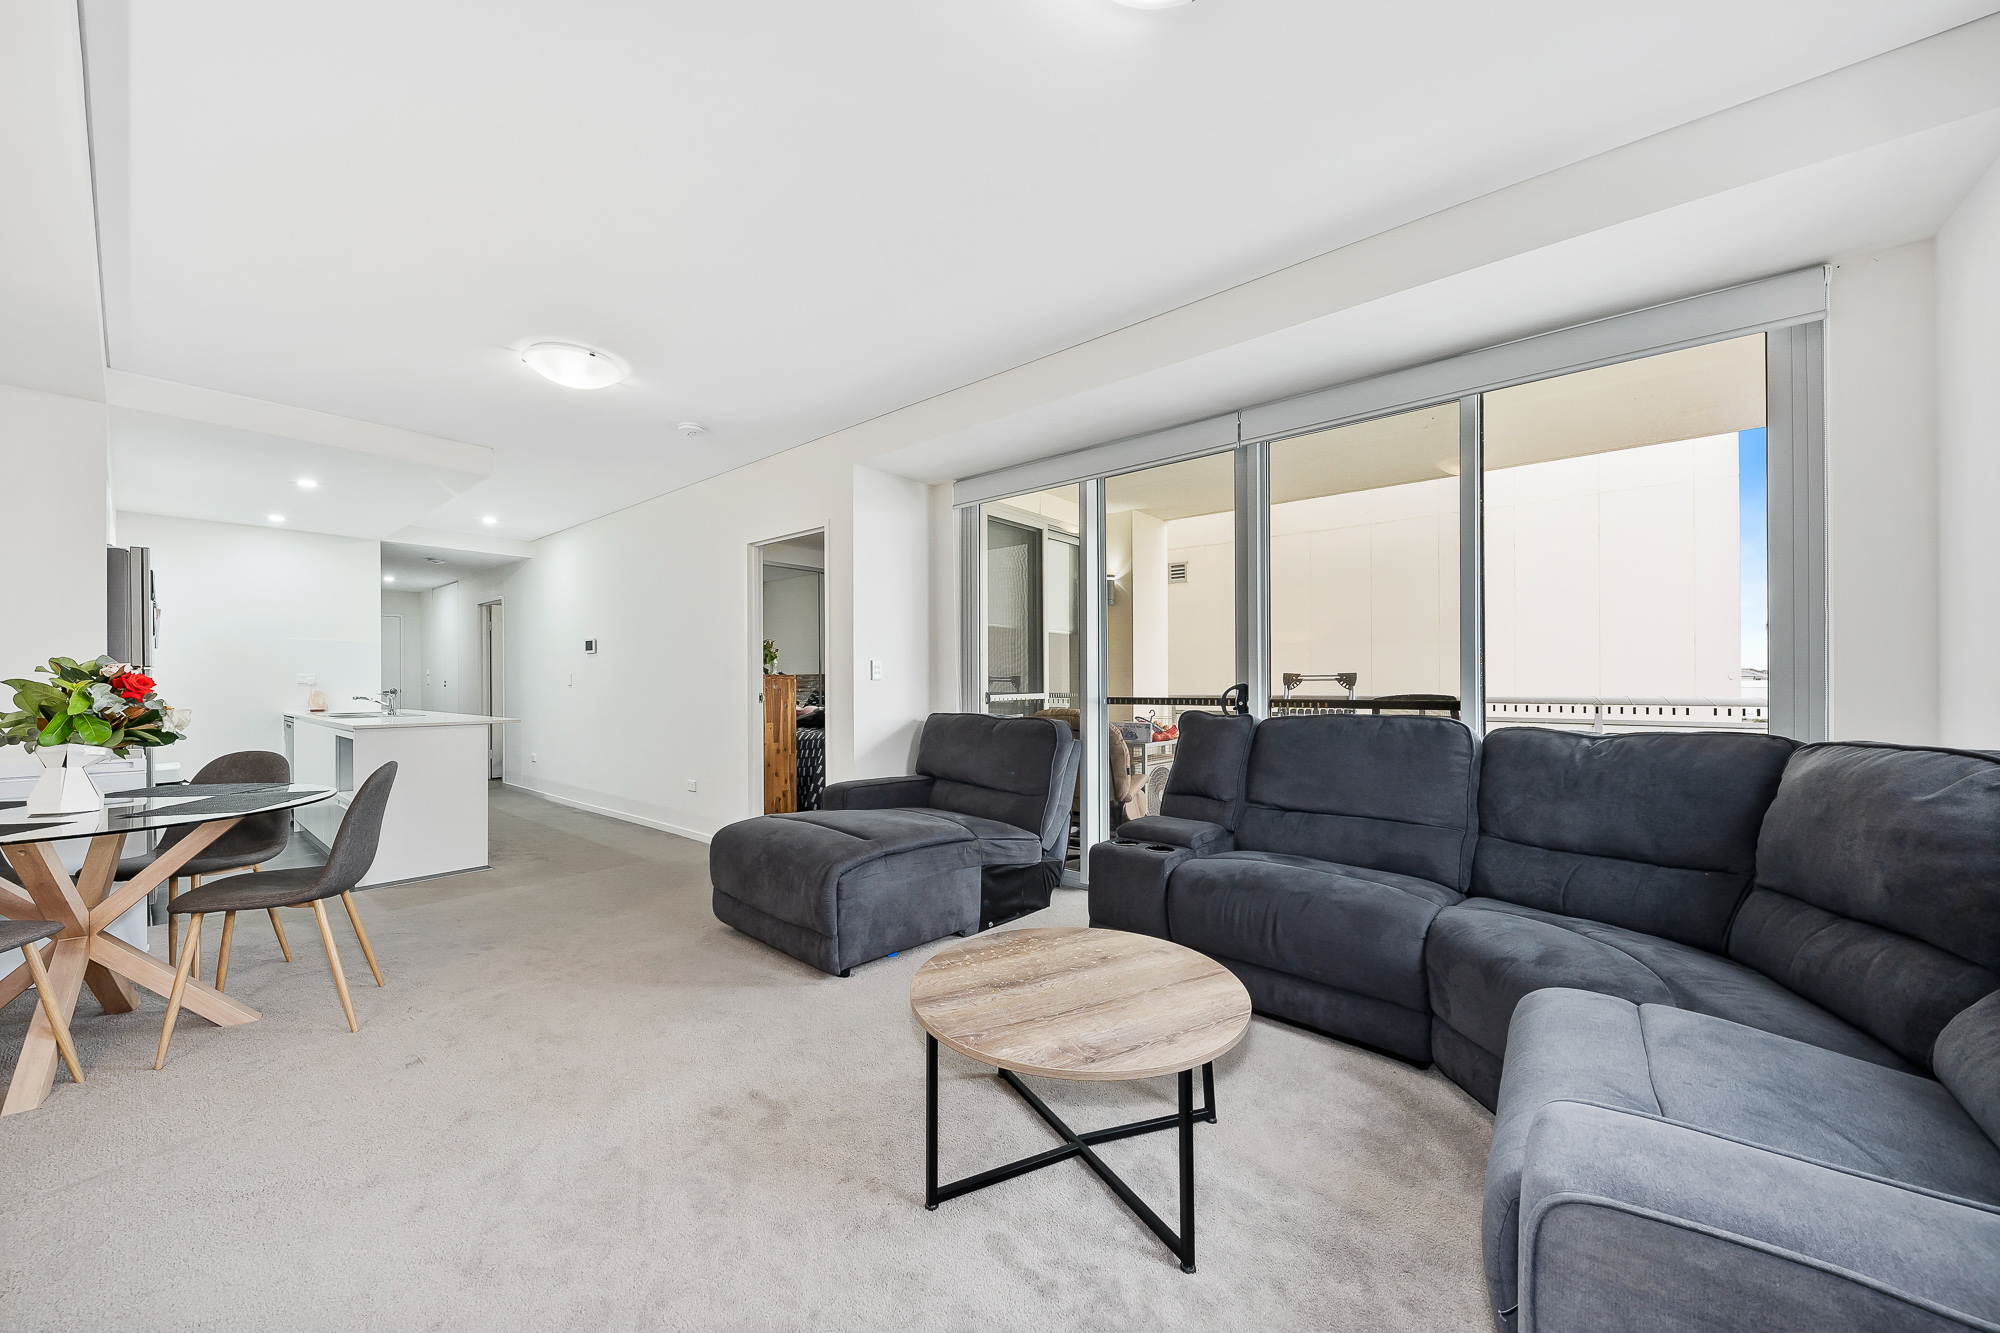 2 Bedrooms, Apartment, Sold , Rebecca Street, 2 Bathrooms, Listing ID 1609, Tallawong, NSW, Australia, 2762,